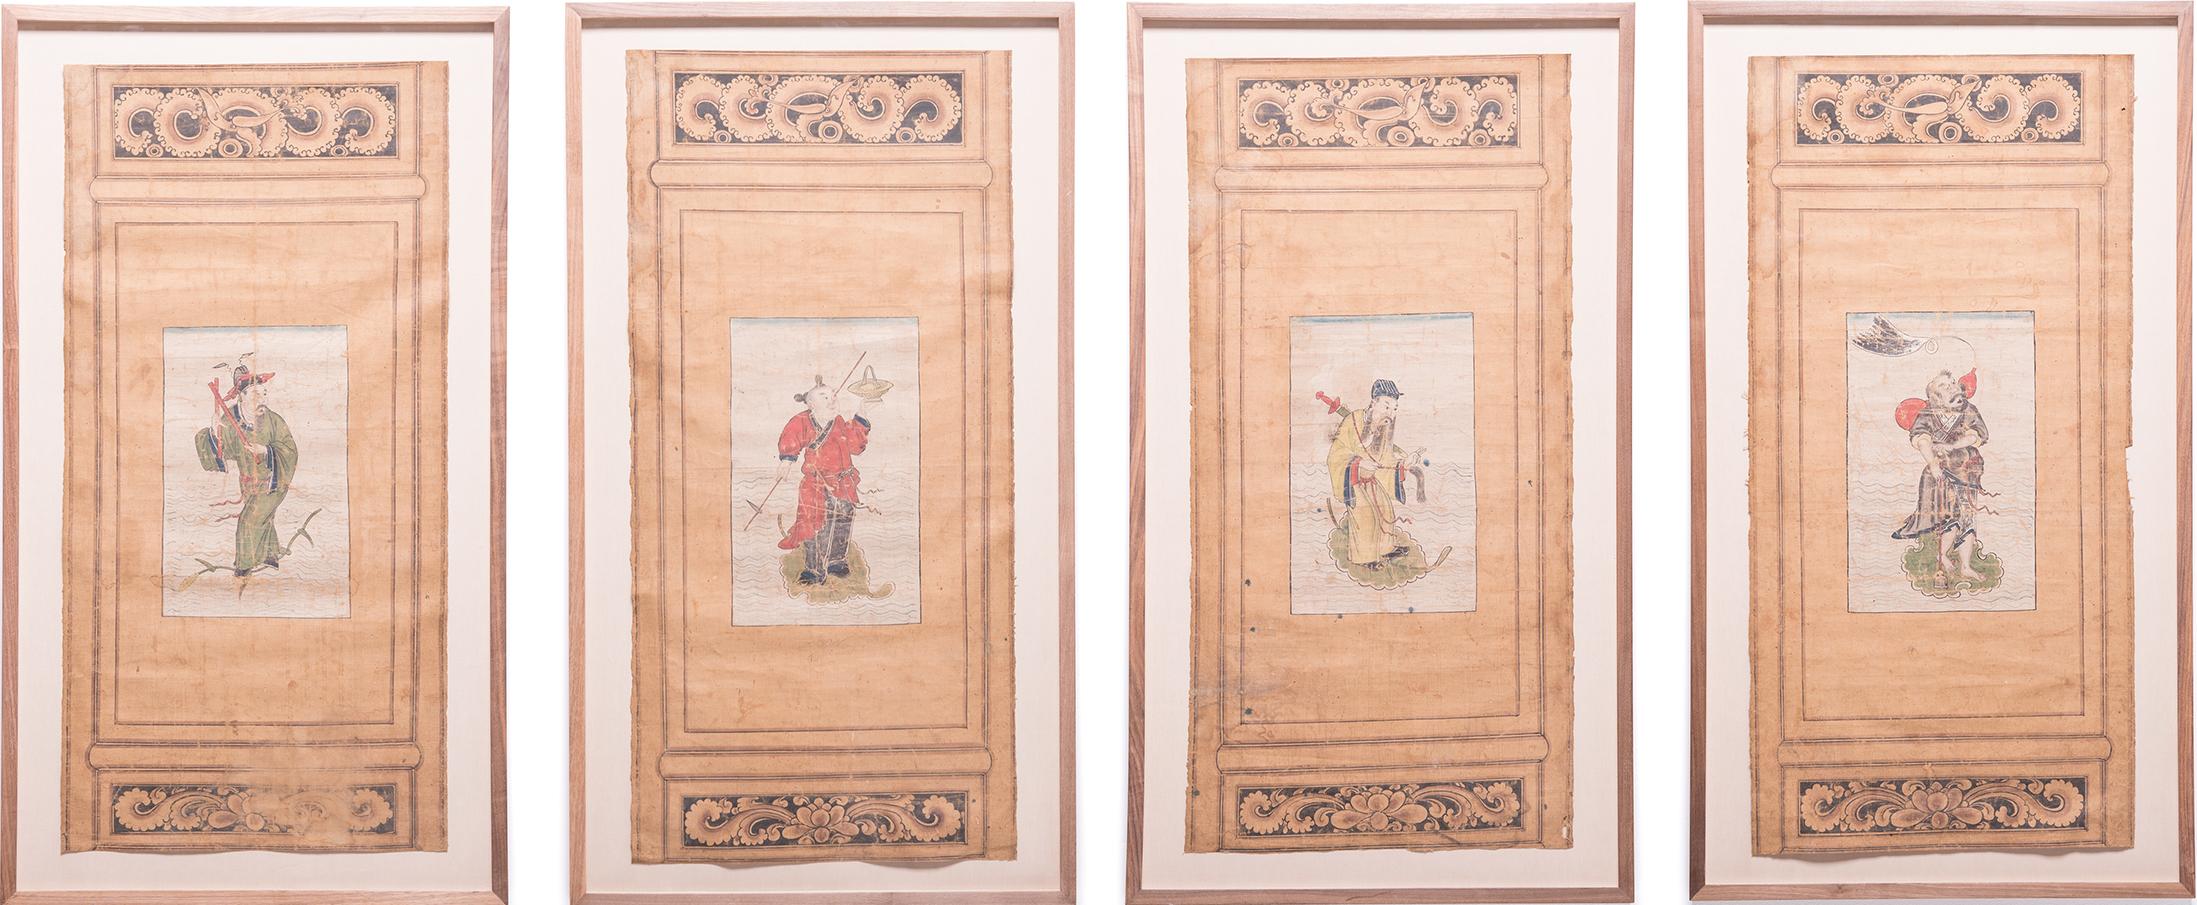 Unknown Portrait Painting - Set of Four Chinese Immortals Screen Paintings, c. 1850